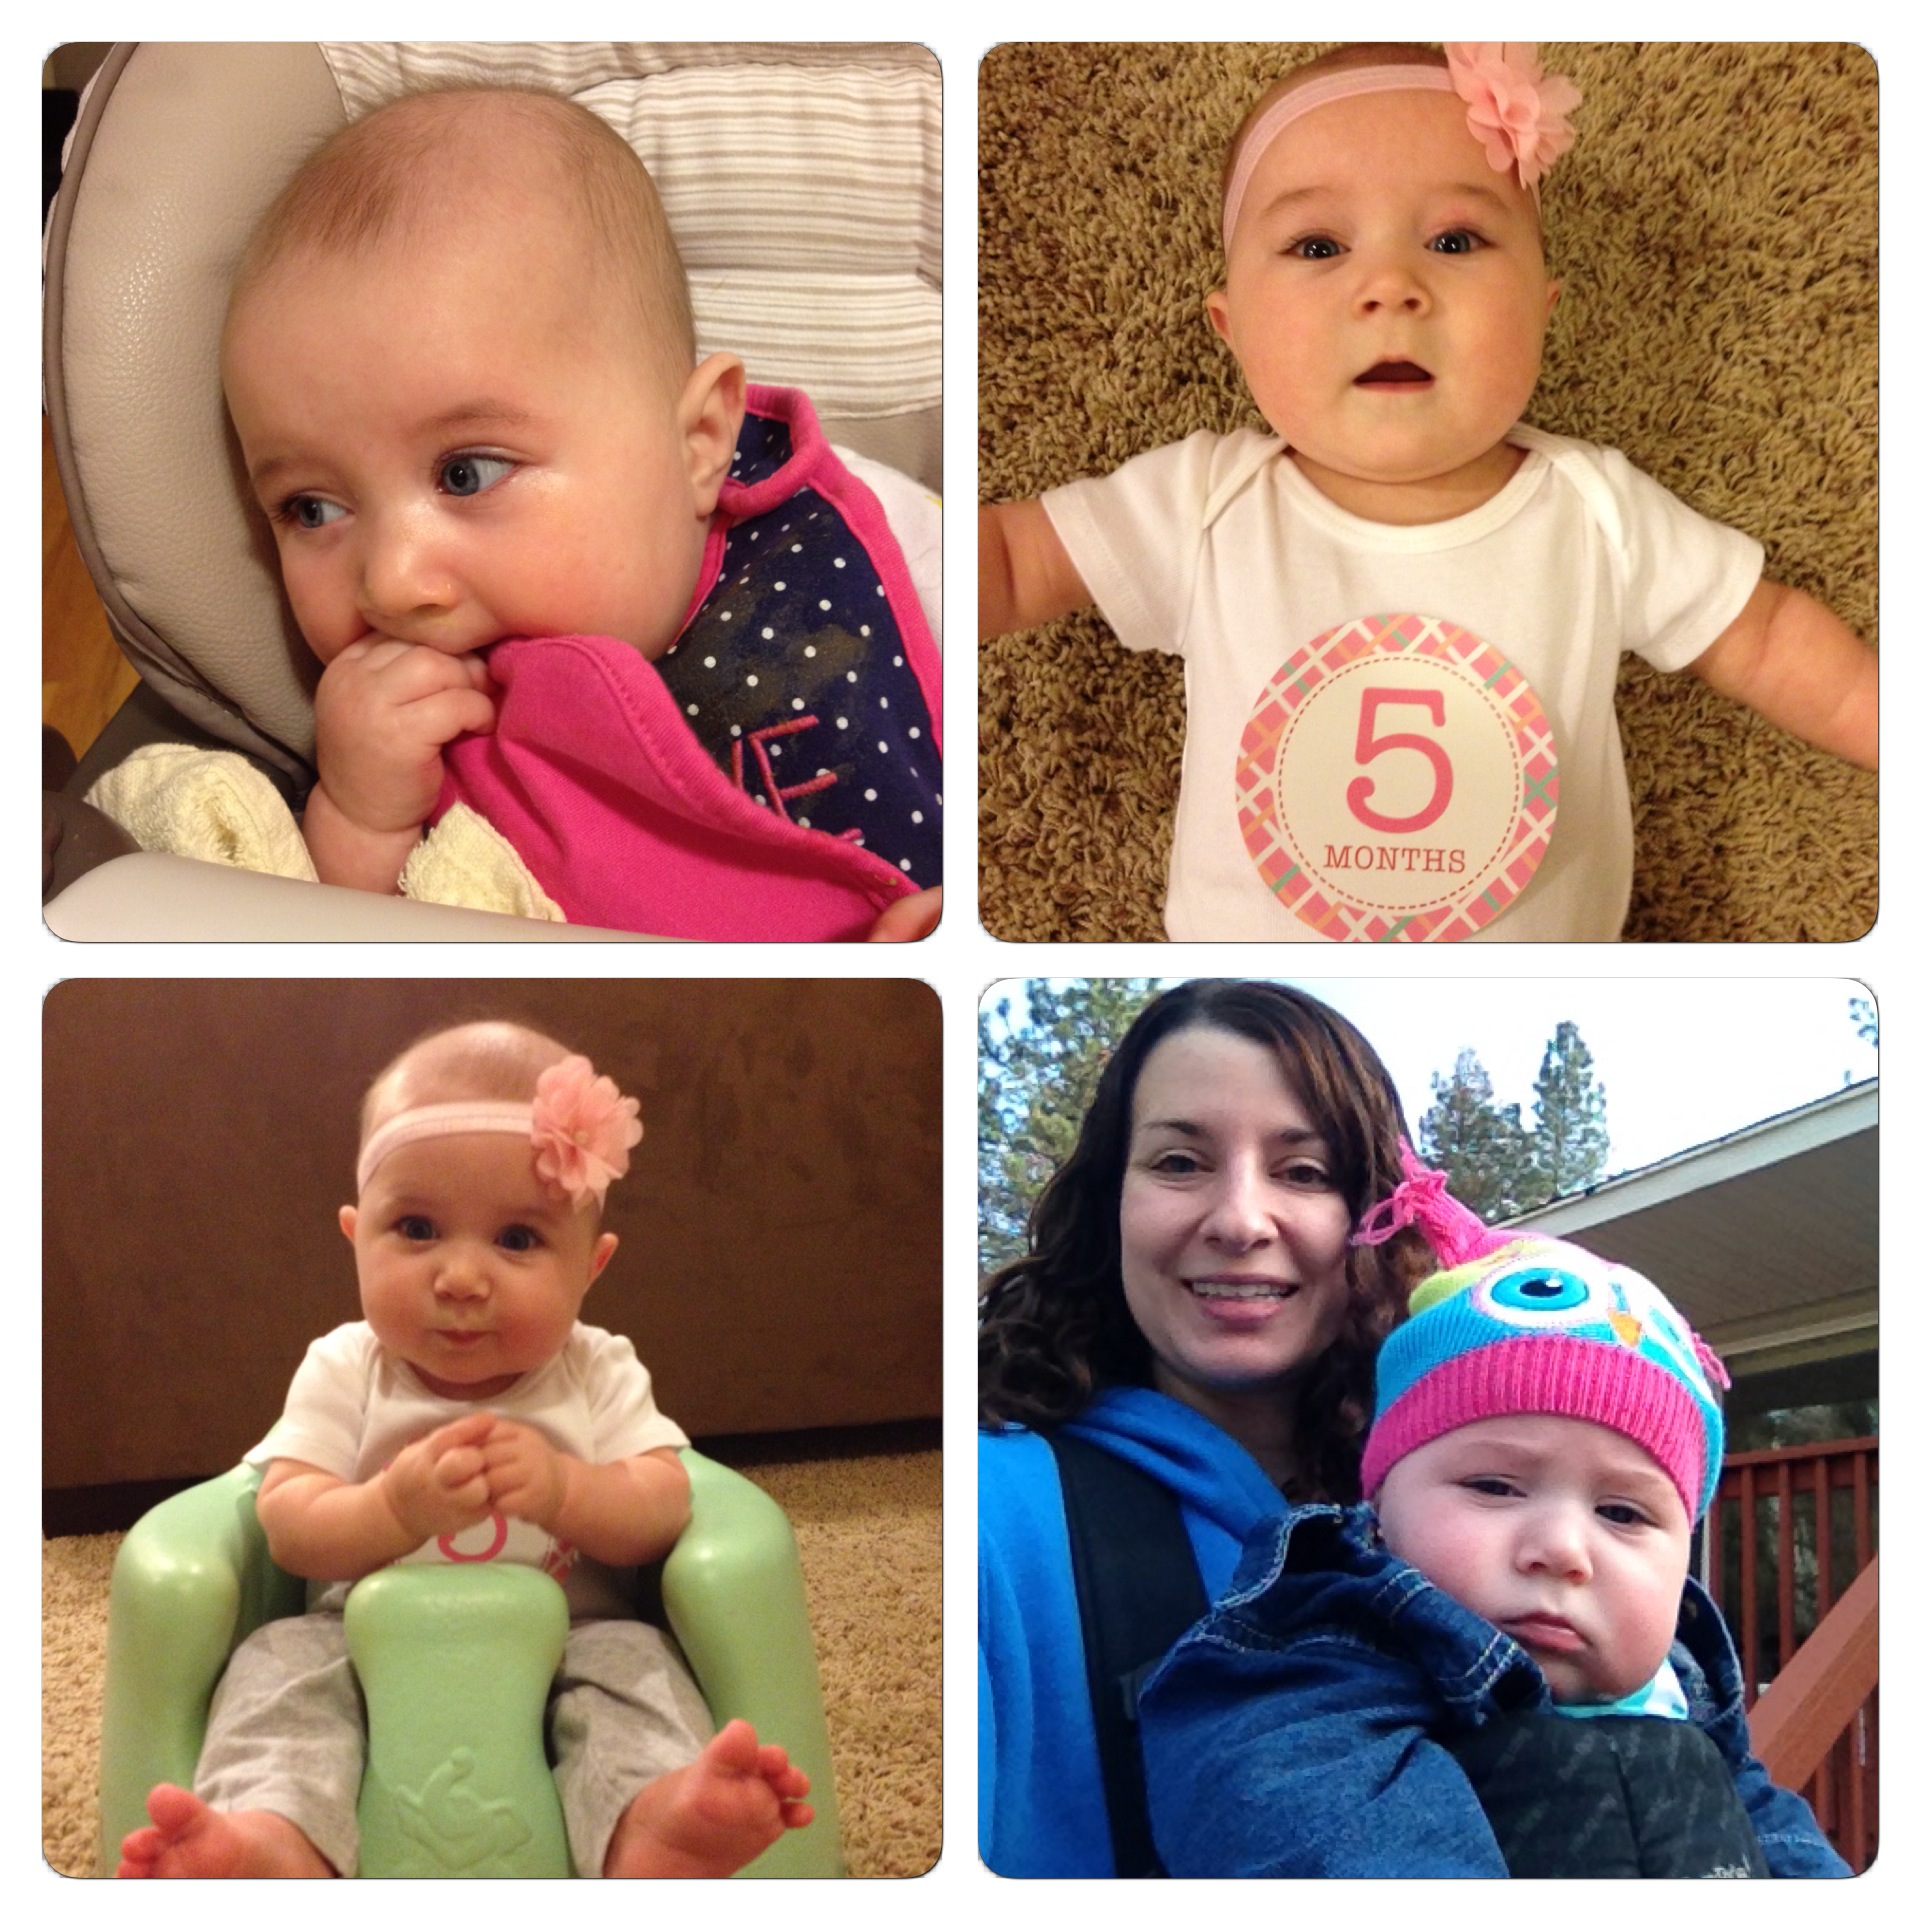 Mikayla is now five months old.